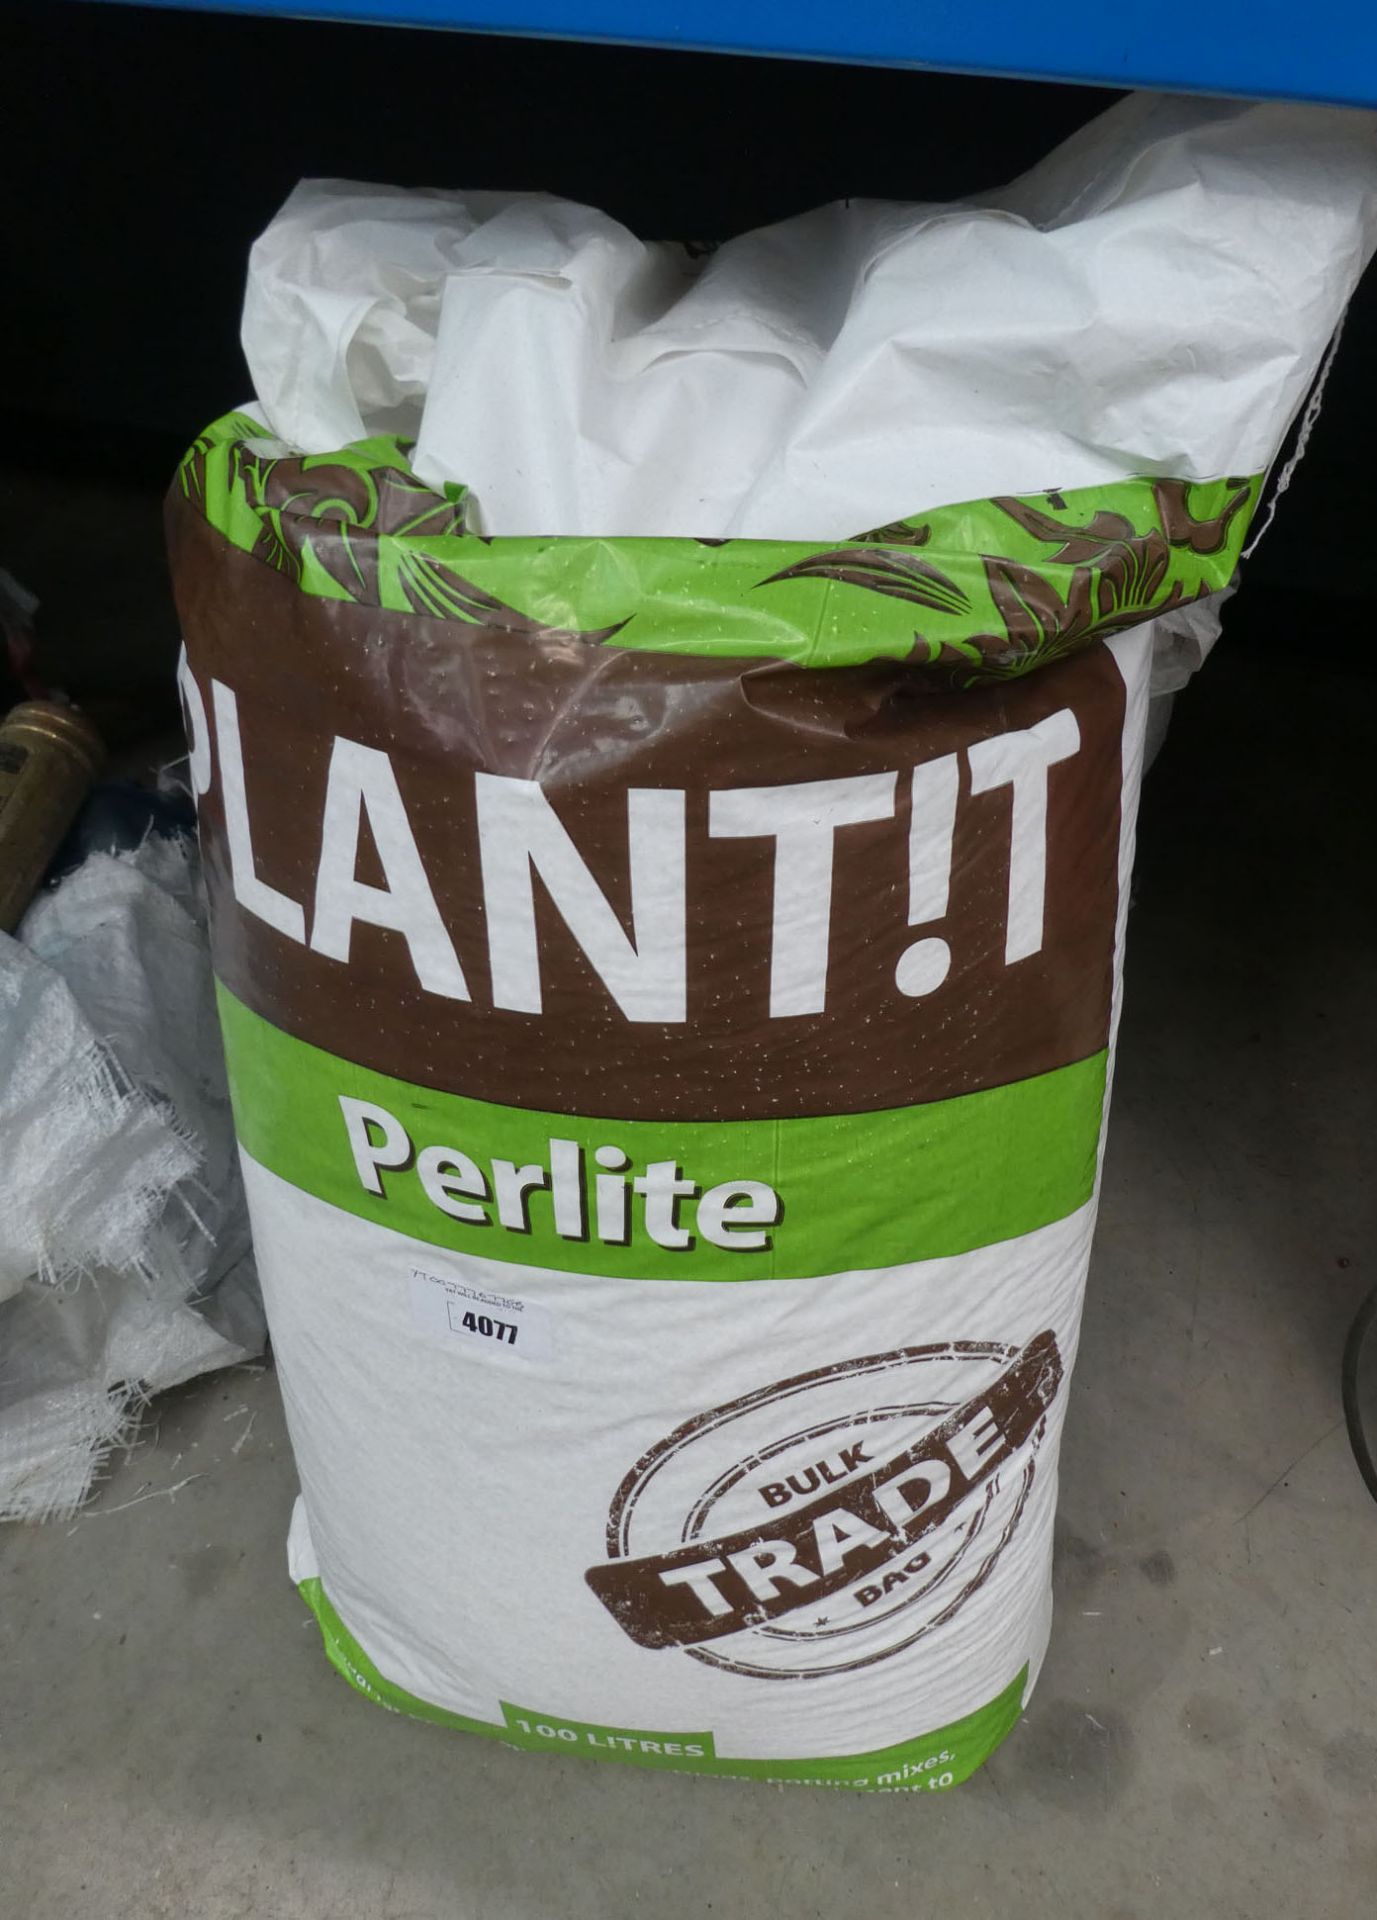 Bag of PLANT!T Perlite natural grow medium made from volcanic rock